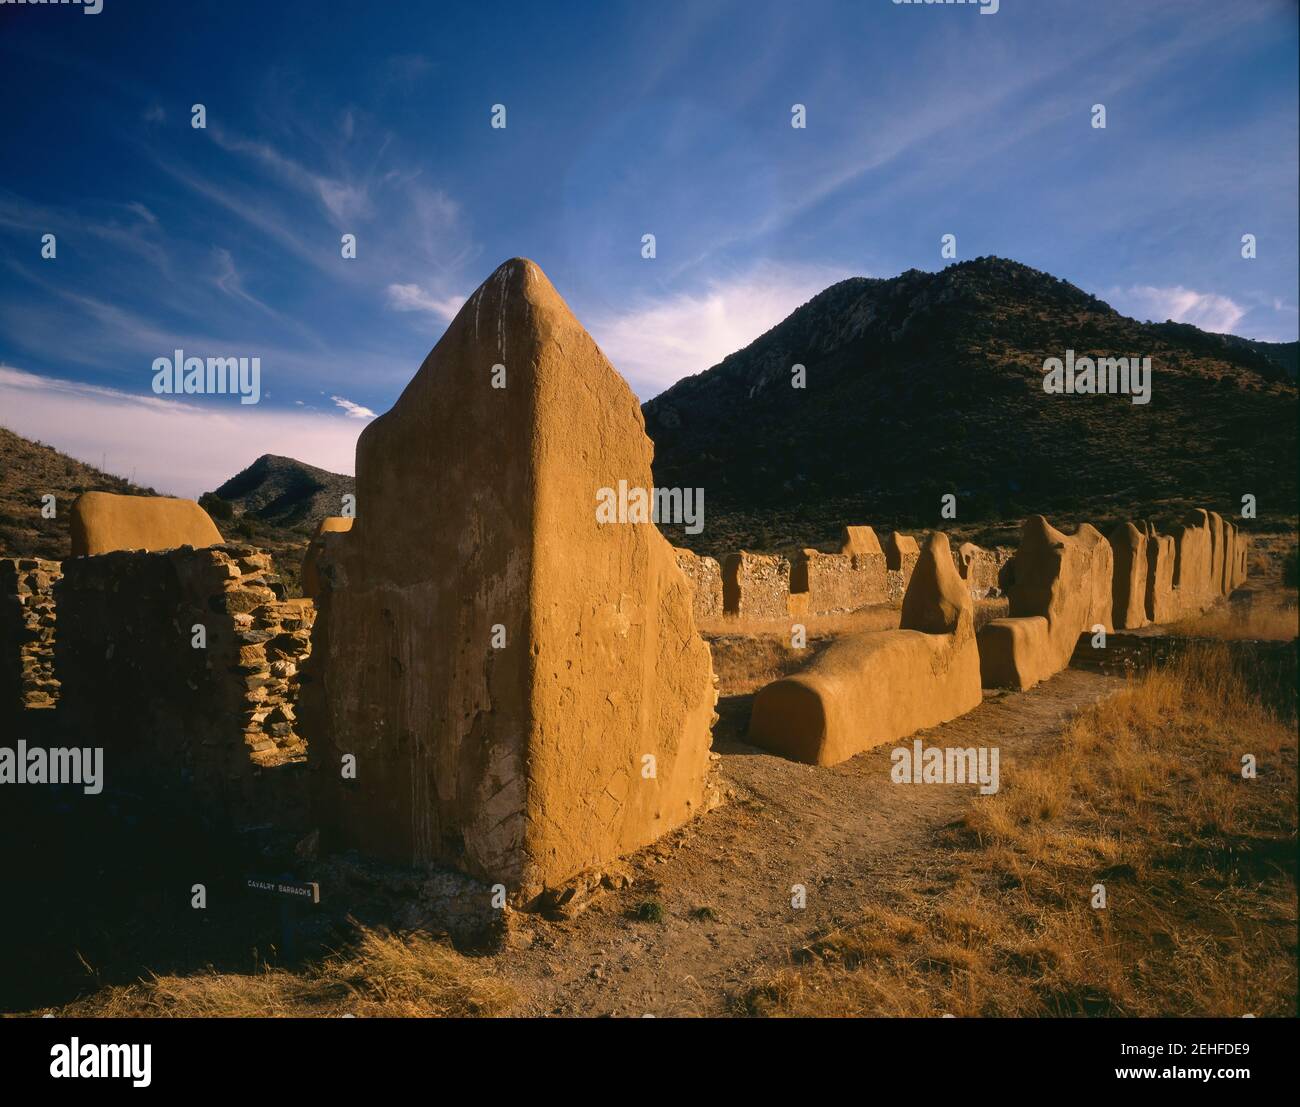 Cochise County  AZ/NOV Ruins of Fort Bowie  Ft. Bowie National Historic Site with a mountain known as Helen's Dome beyond. Located in Apache Pass  eas Stock Photo